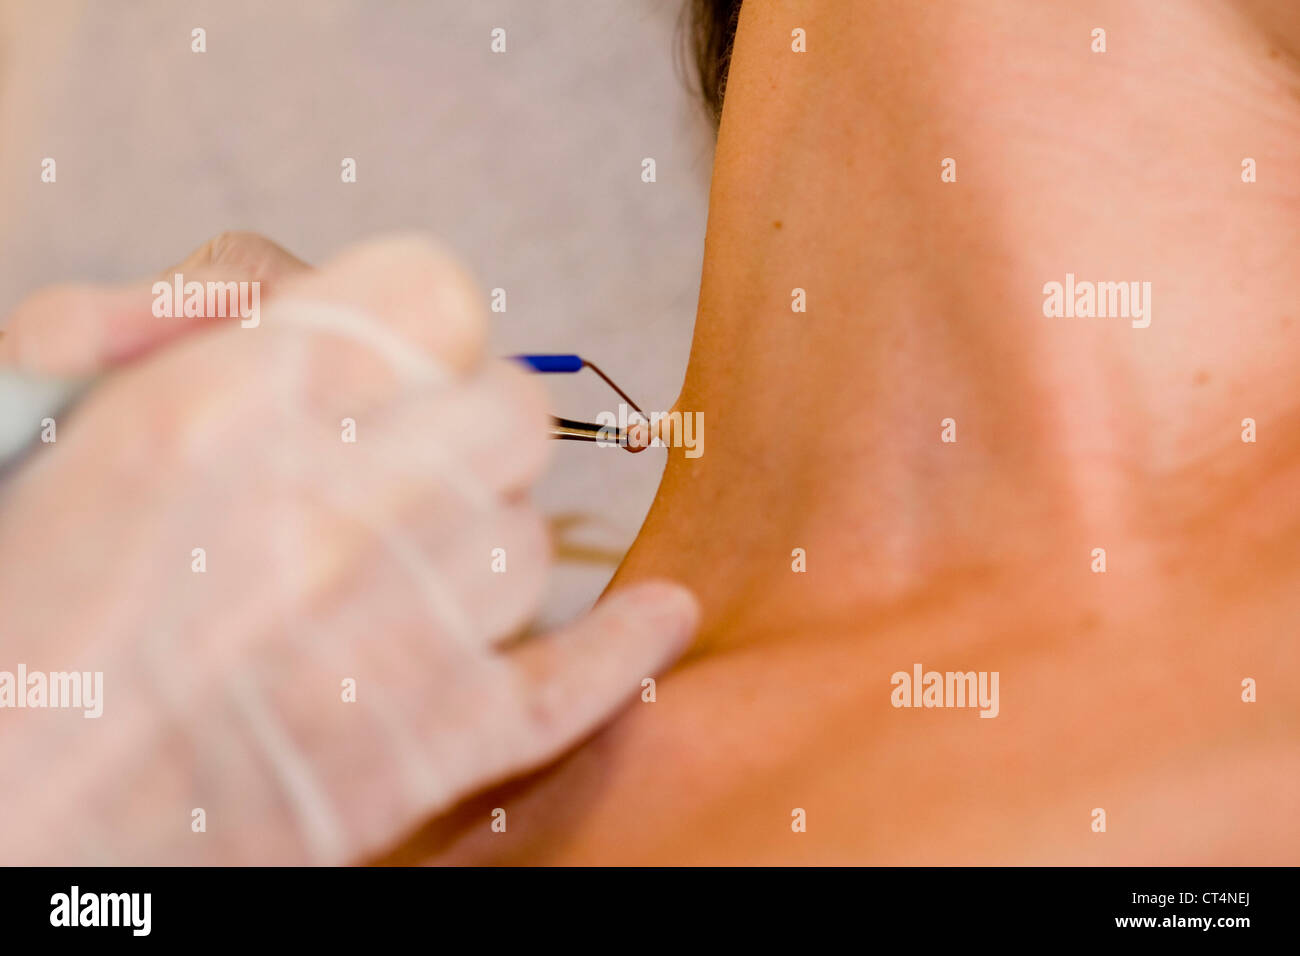 A skin tag or acrochordon on a person's buttocks Stock Photo - Alamy